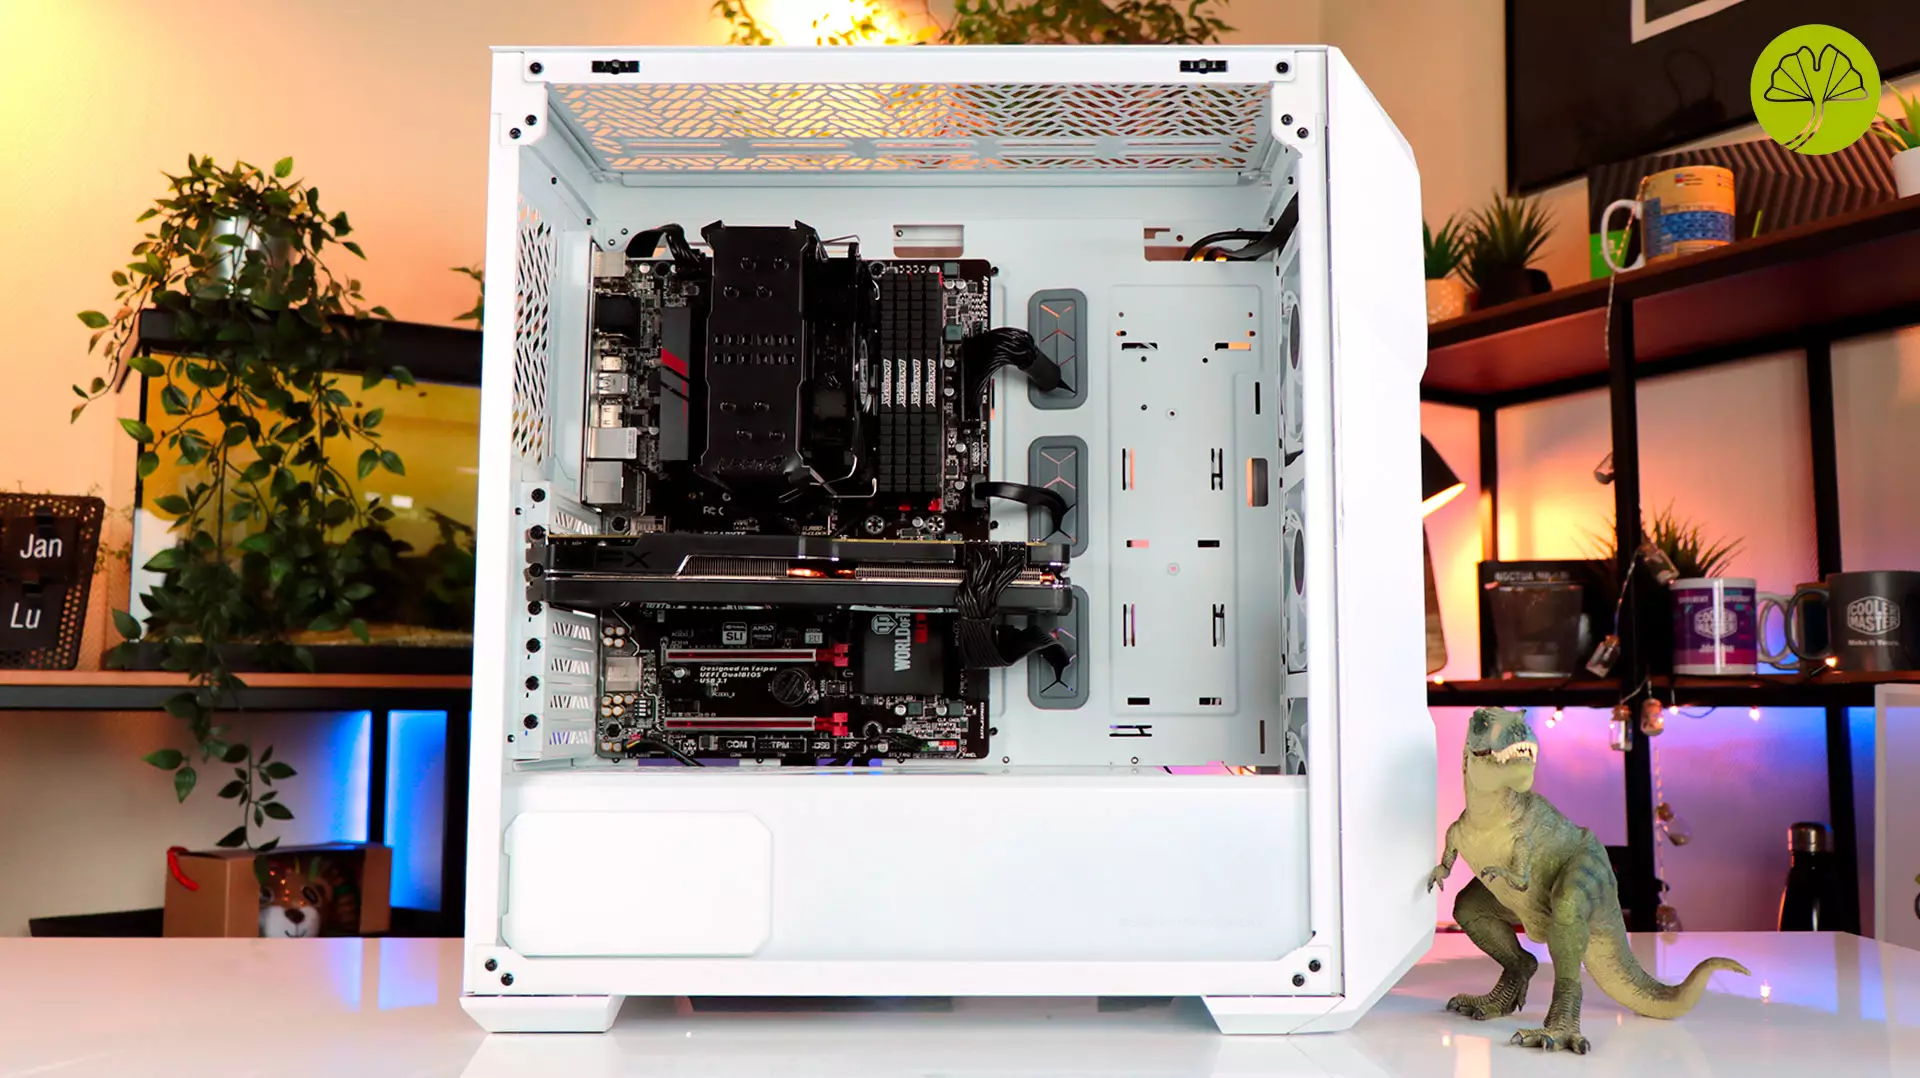 MAG Forge 100R, le test complet - Page 2 sur 6 - GinjFo